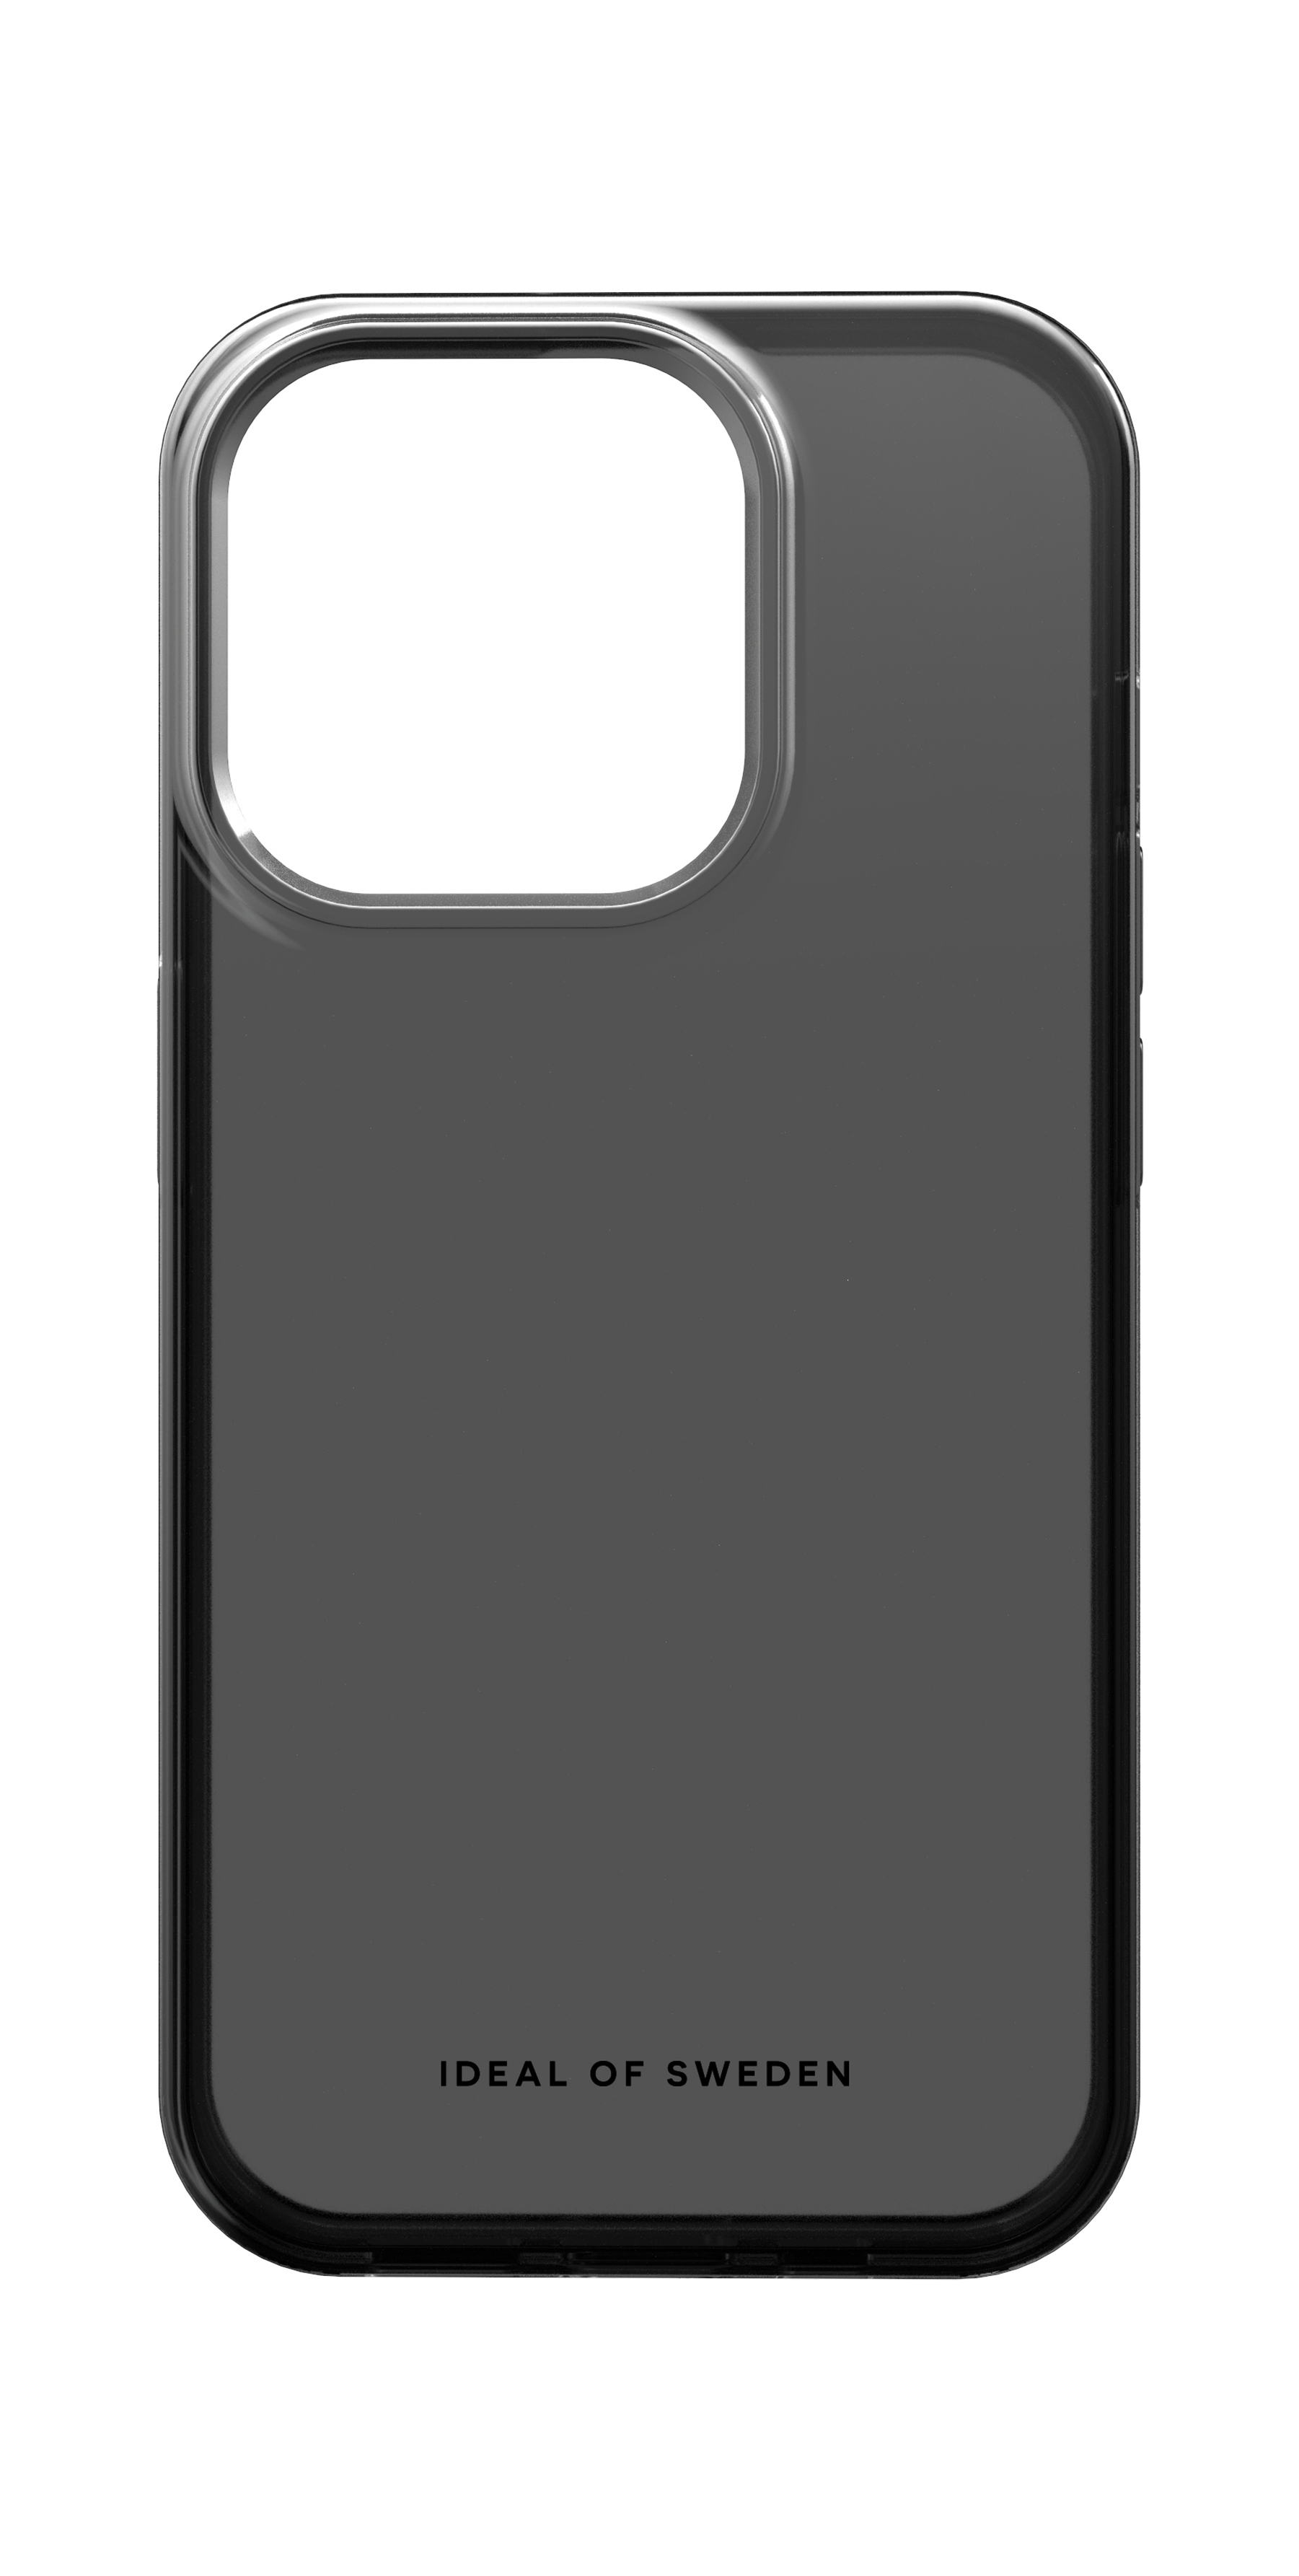 IDEAL OF SWEDEN Apple, Black Tinted iPhone Backcover, Pro, Case, Clear 15